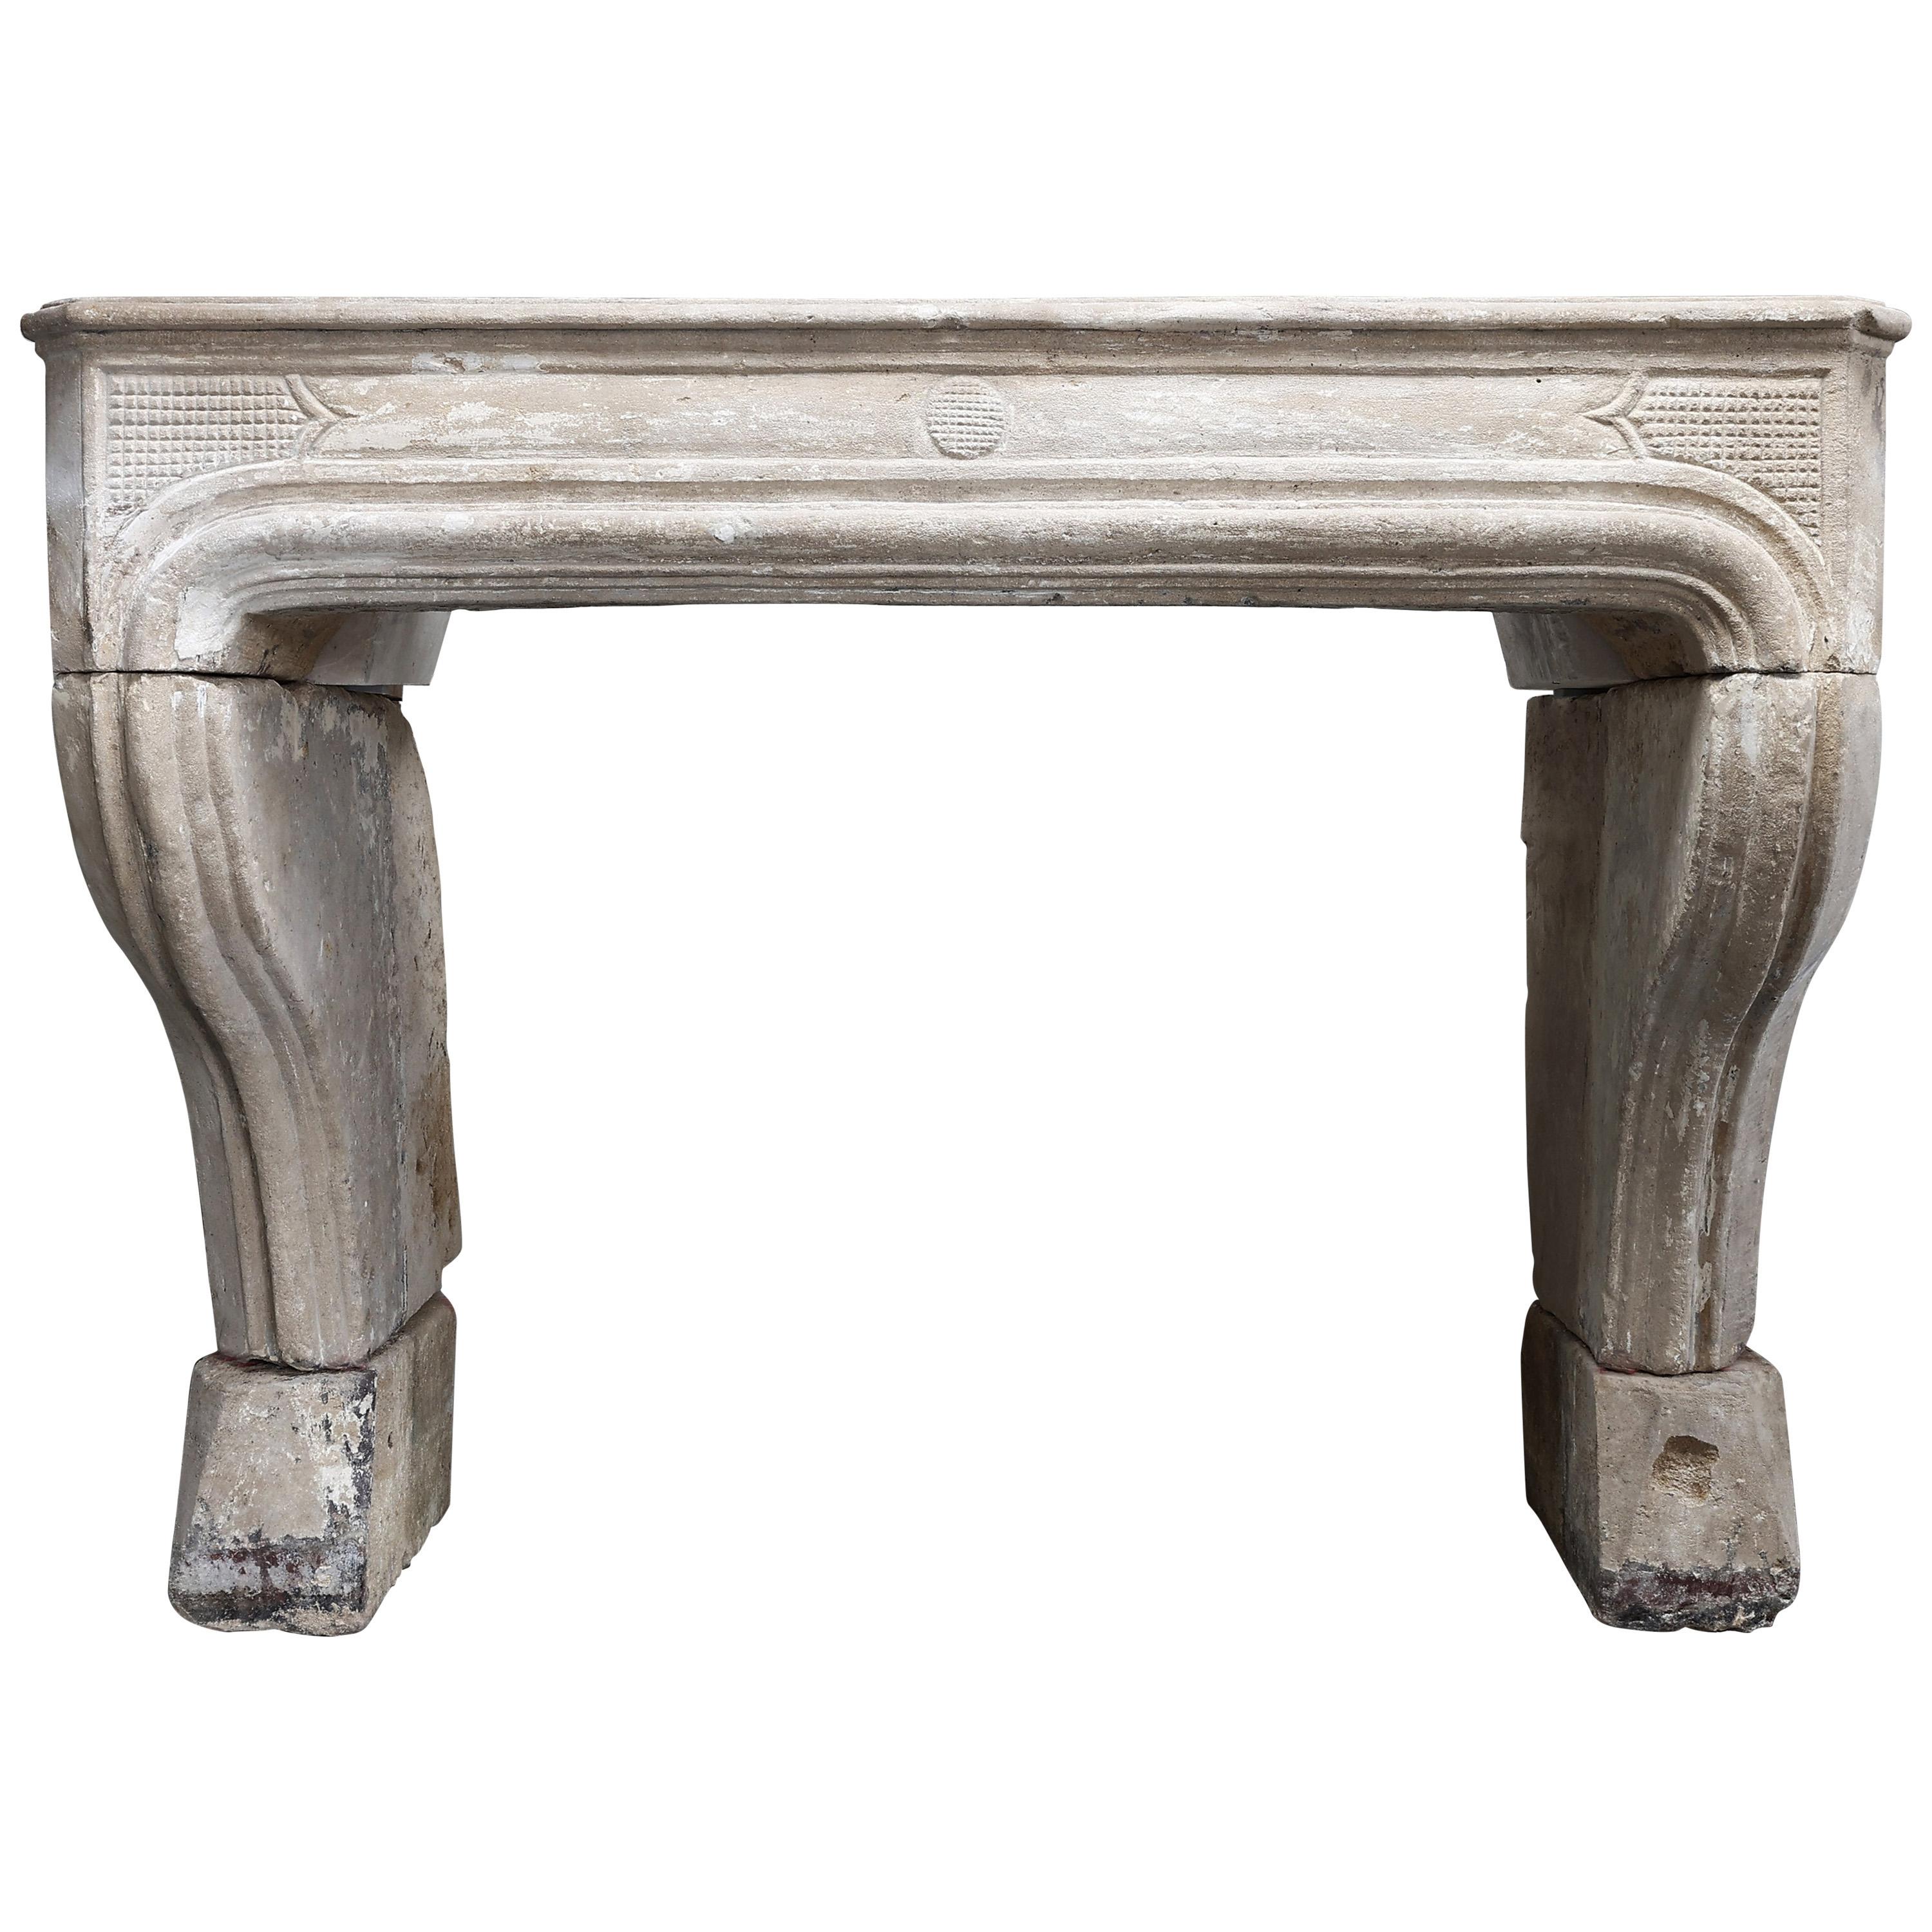 19th Century Mantel Piece of French Limestone in Style of Louis XIV